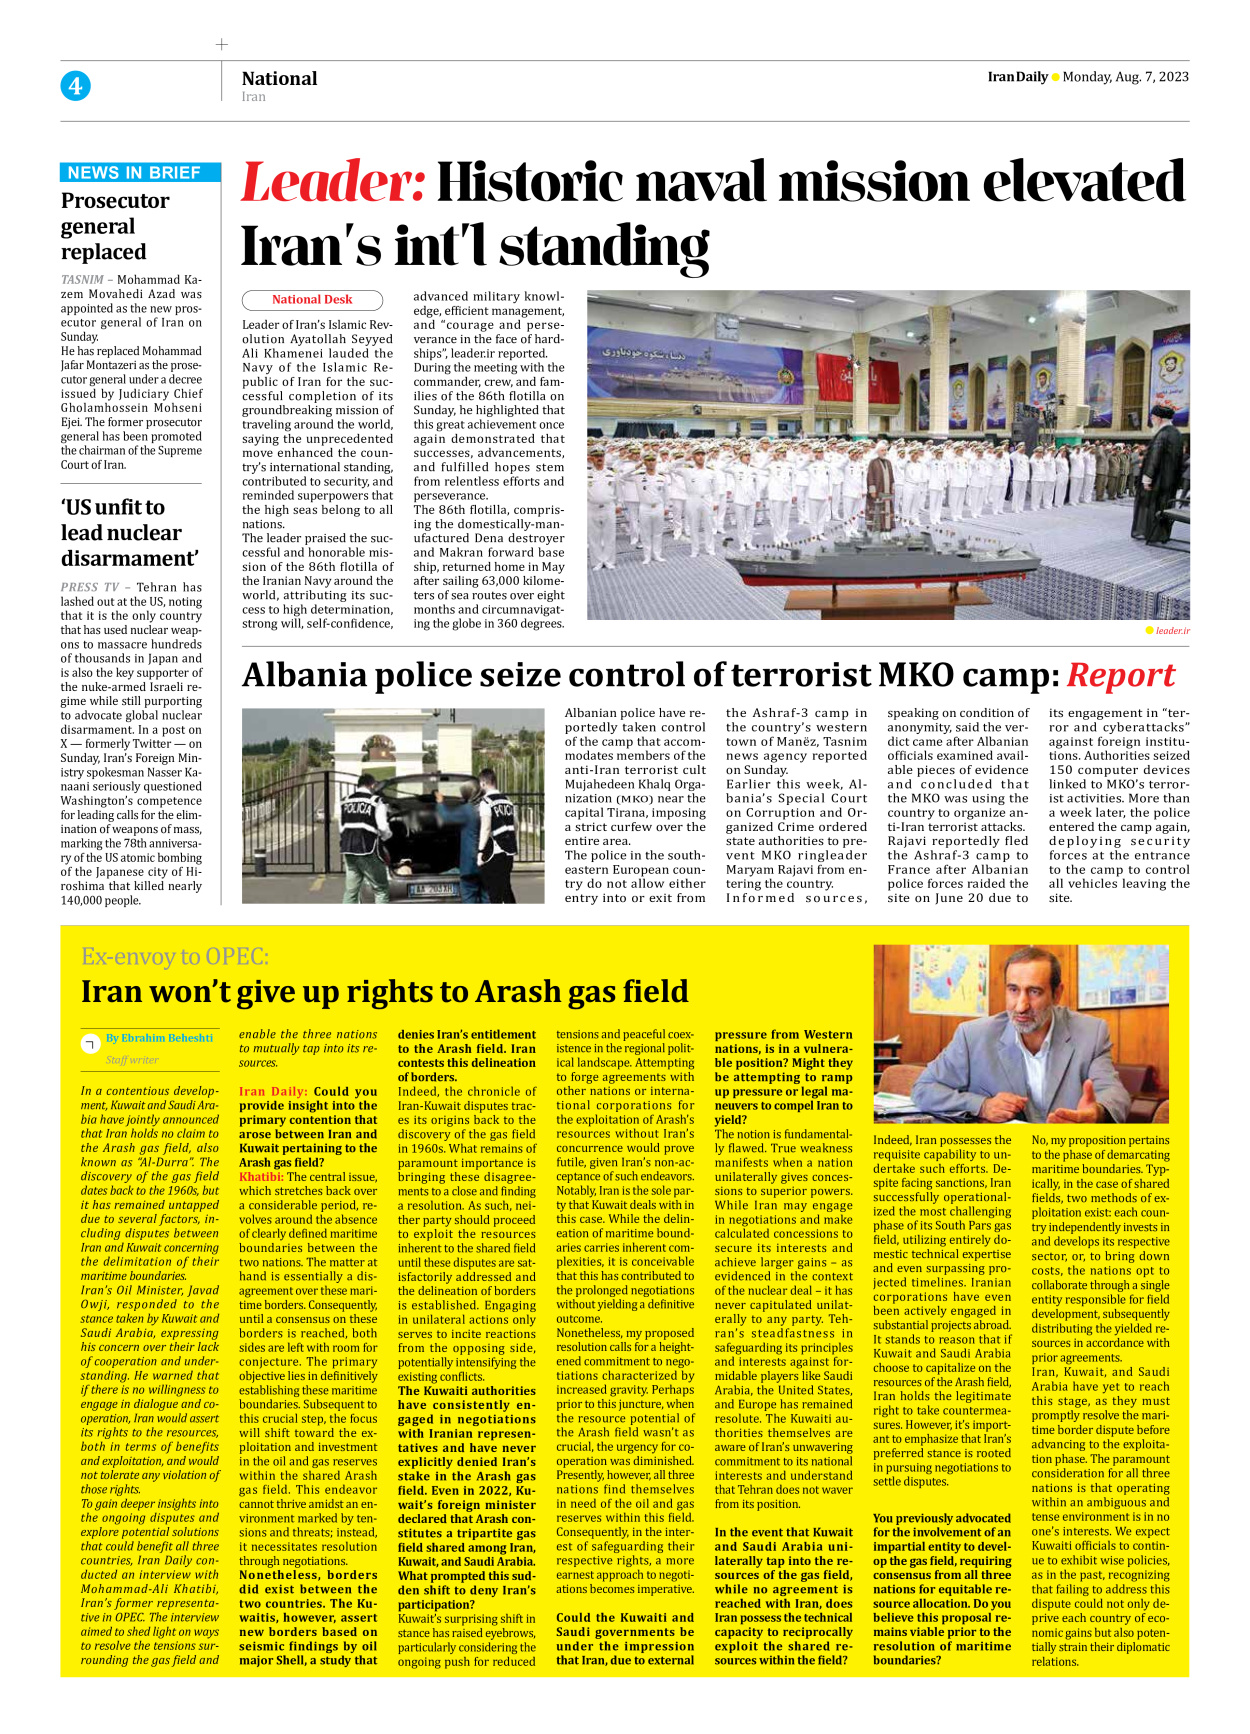 Iran Daily - Number Seven Thousand Three Hundred and Fifty Six - 07 August 2023 - Page 4